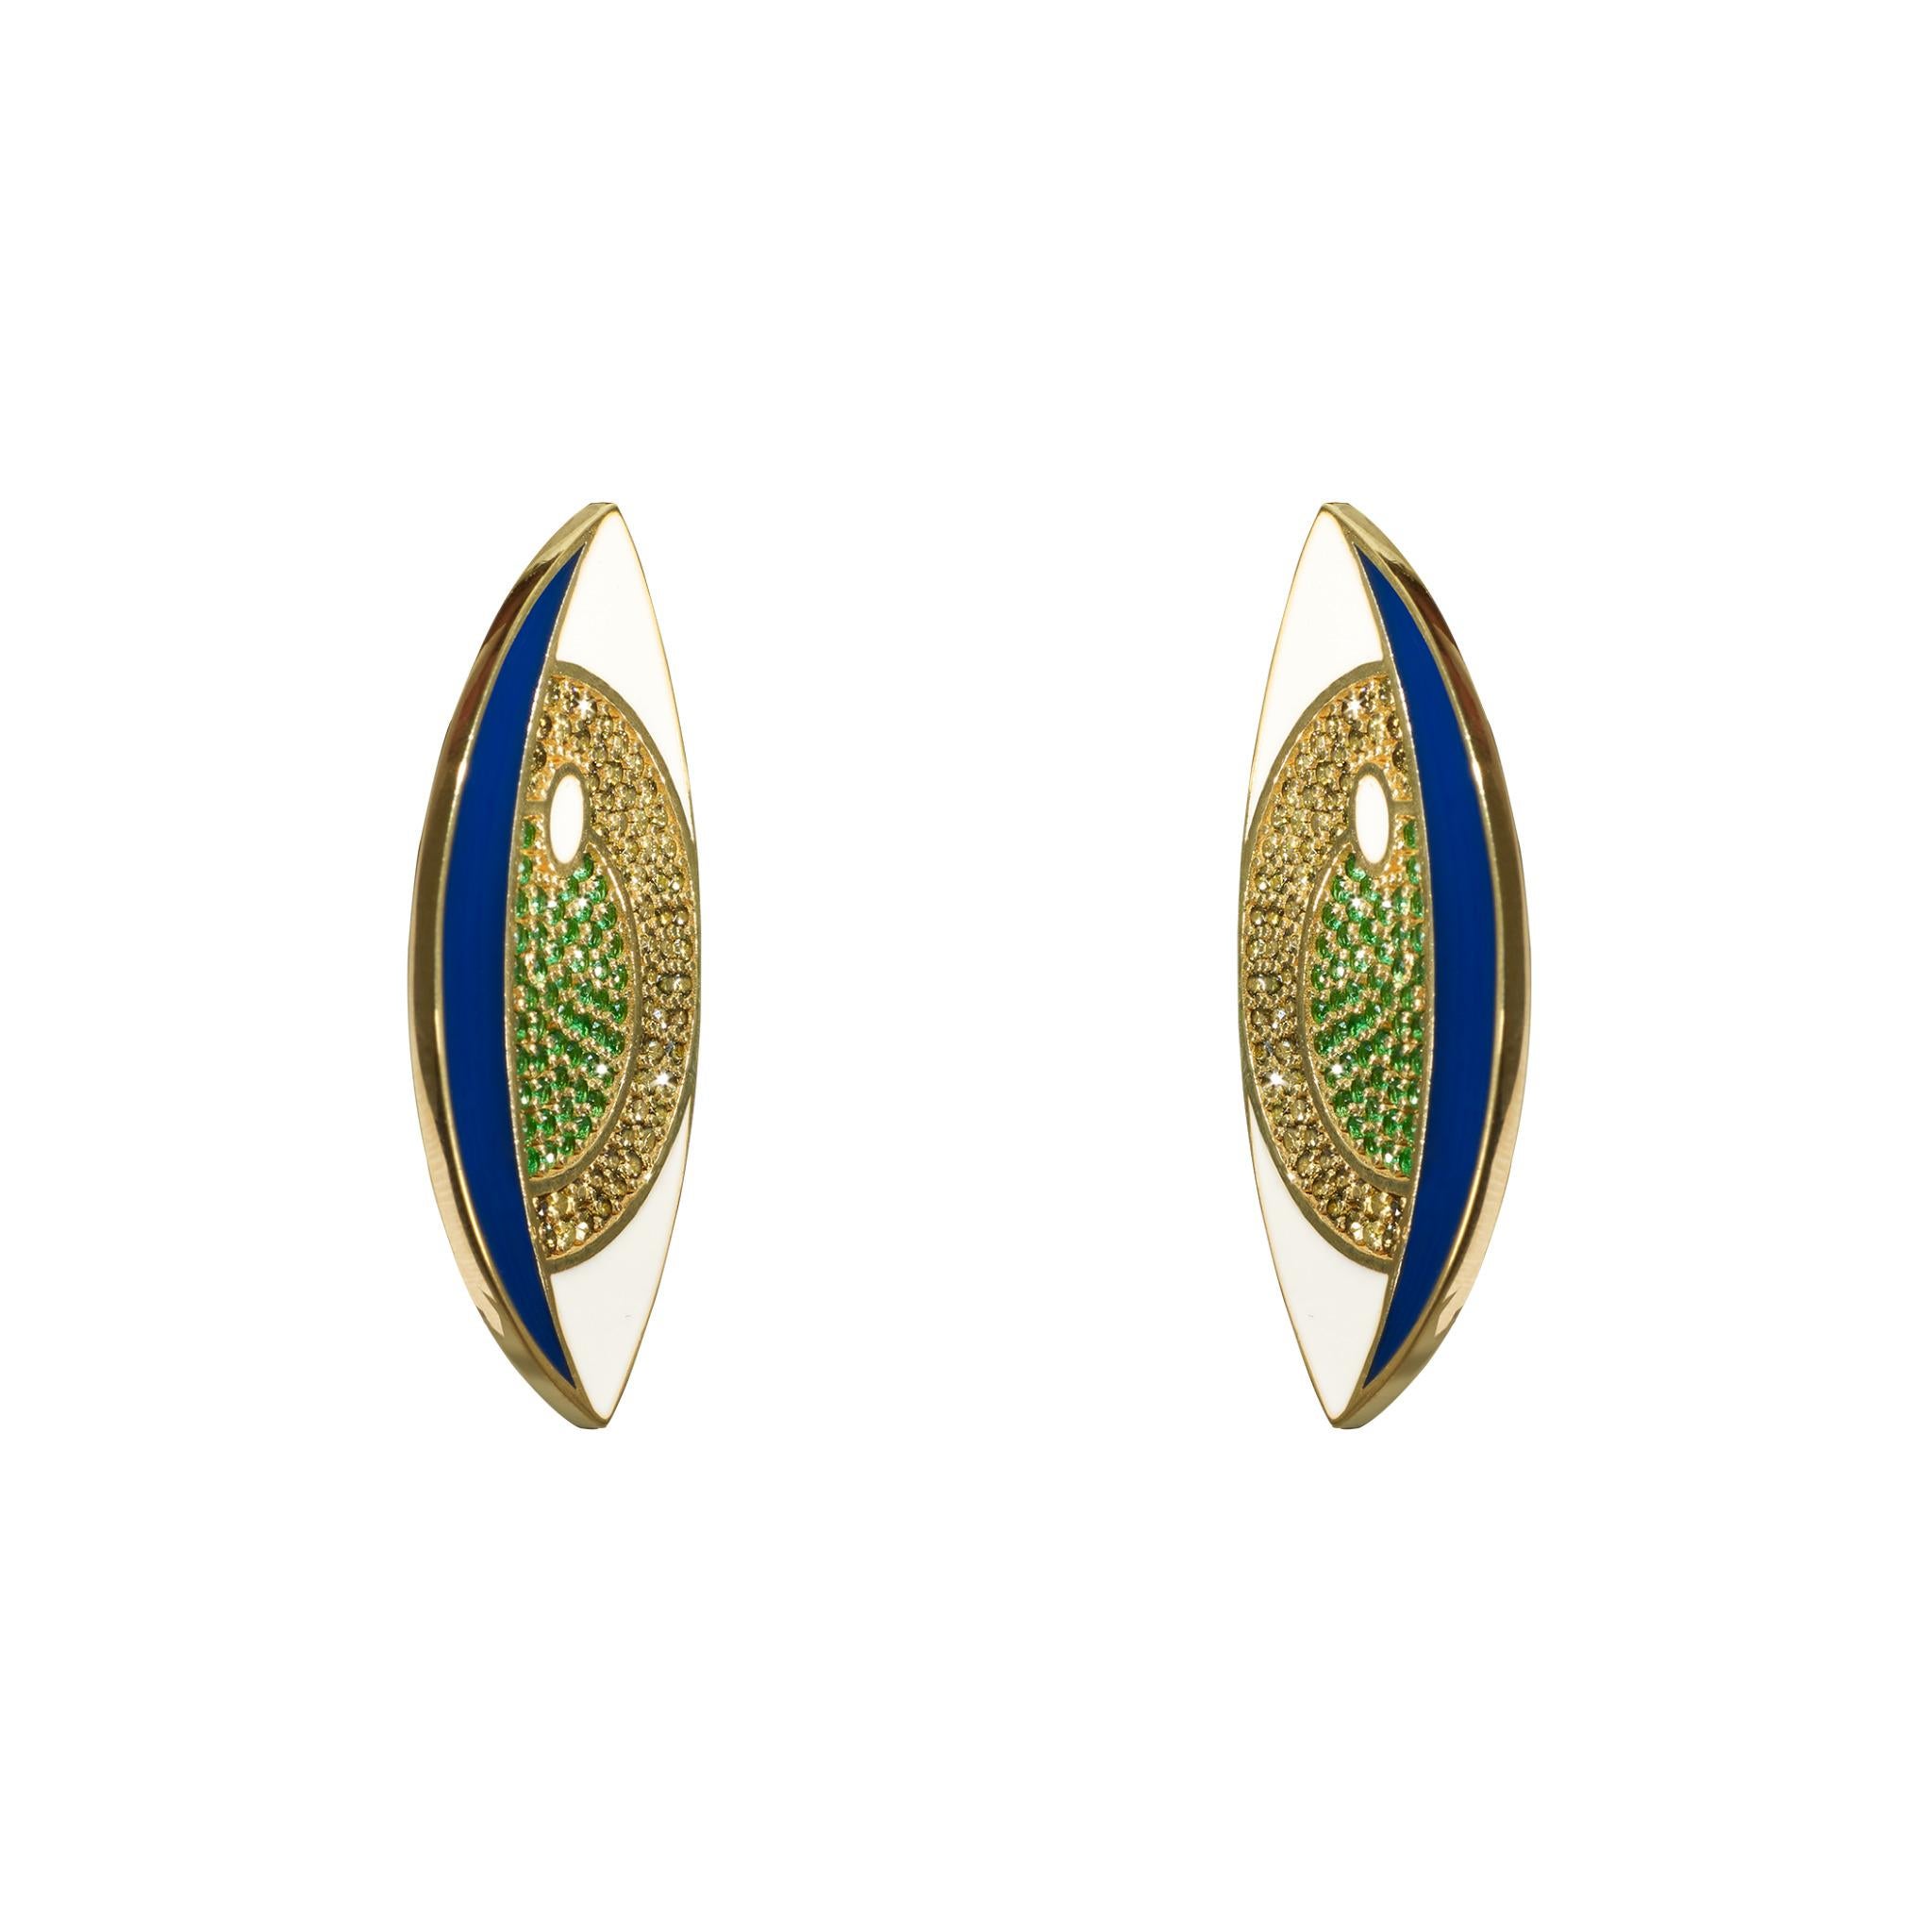 The Dear Eye earring is designed to pay tribute to the designer's childhood and Turkish culture, with a unique twist. The longstanding belief of the watchful gaze is that it keeps you safe from negative energy, harm, and jealousy. BOULO hopes that